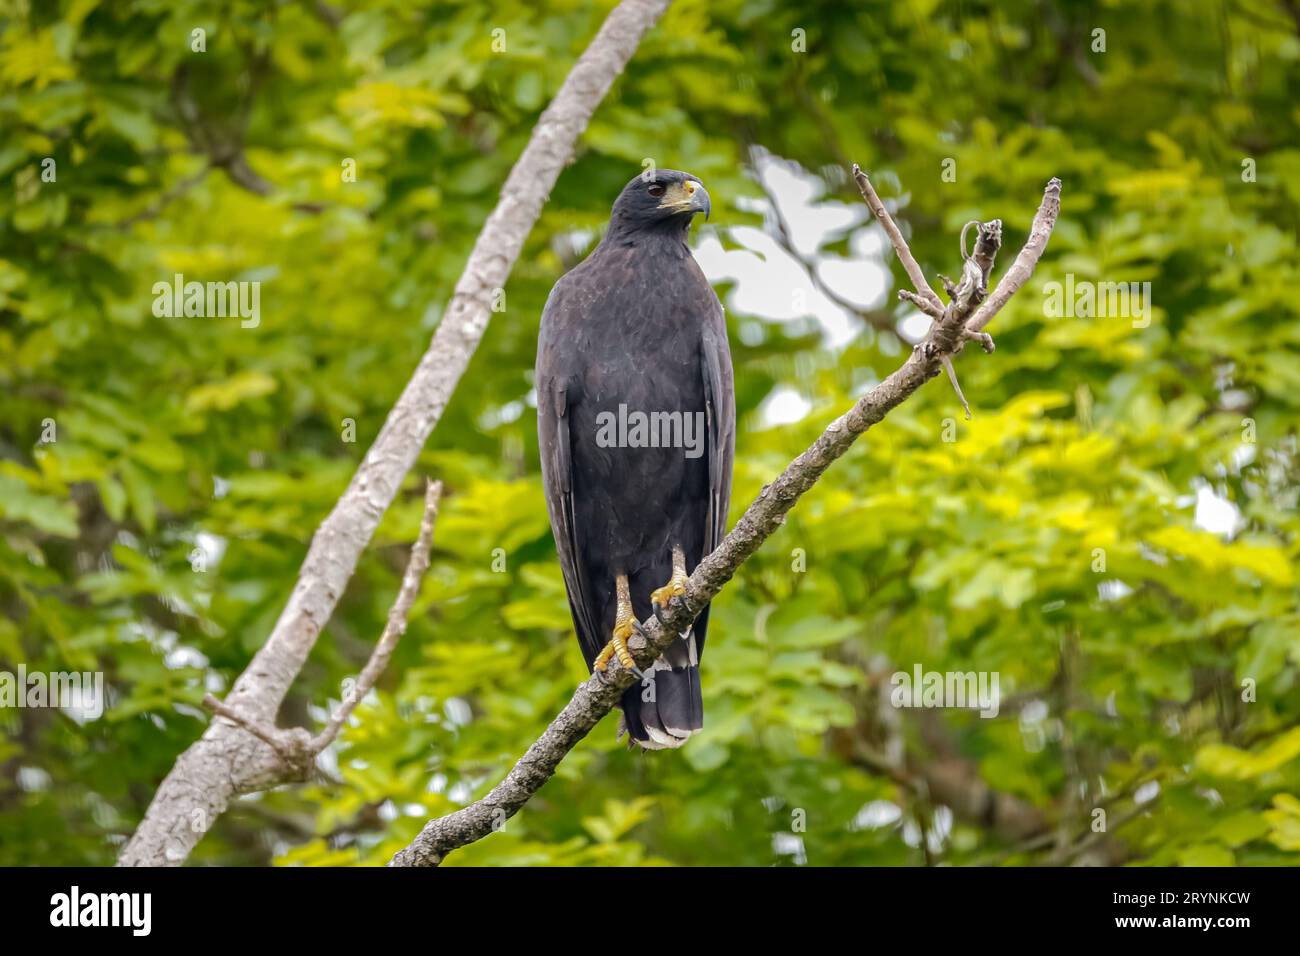 Great black hawk perched on a branch against green background, Pantanal Wetlands, Mato Grosso, Brazi Stock Photo